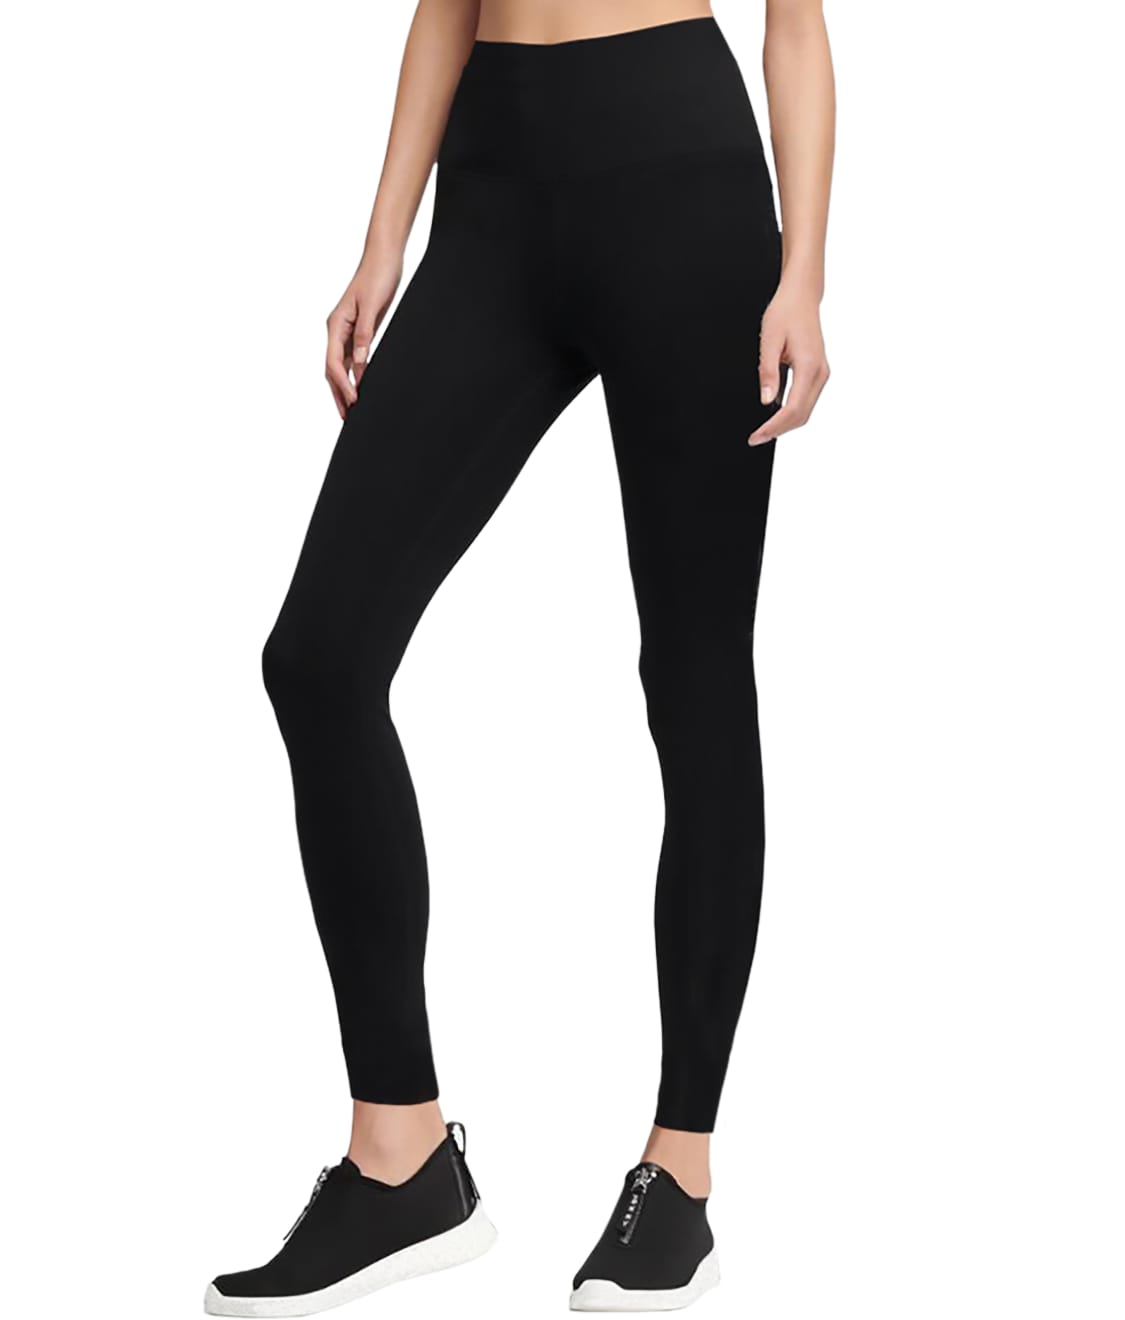 Dkny Leggings Review  International Society of Precision Agriculture